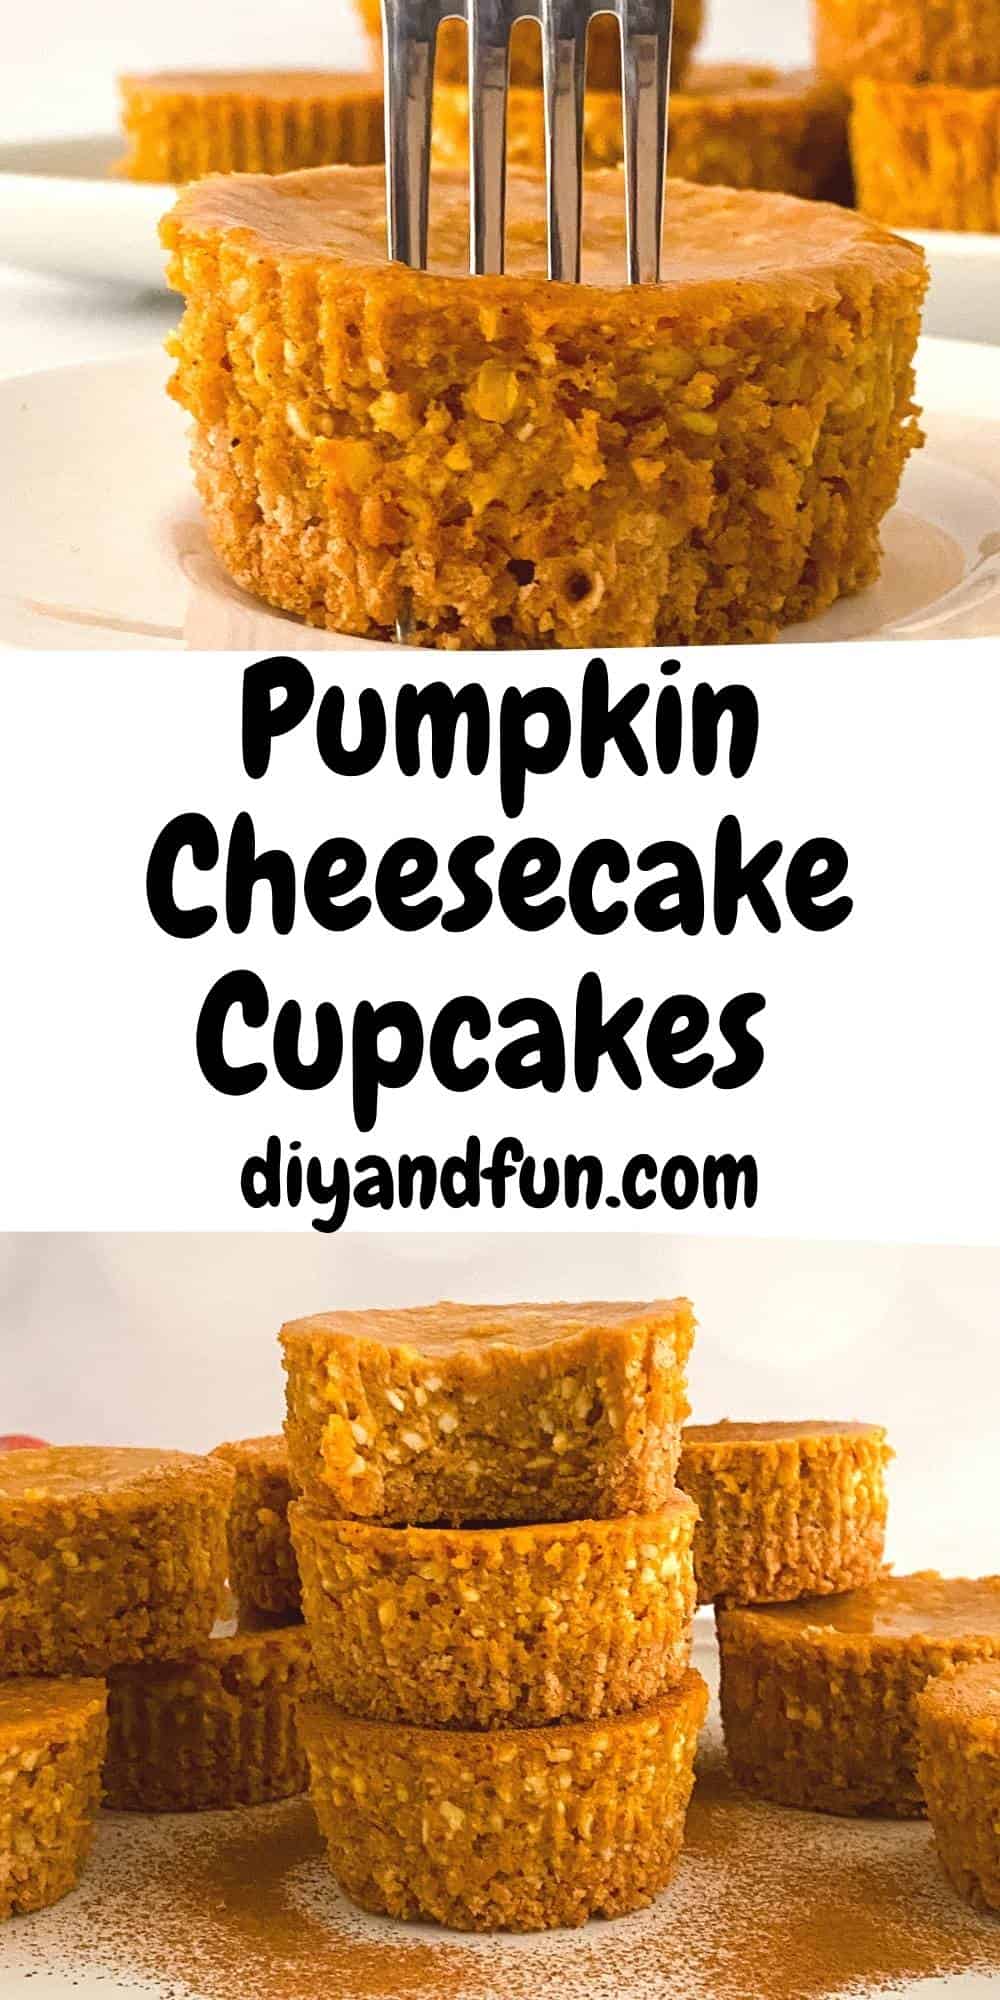 Pumpkin Cheesecake Cupcakes Recipe, a simple recipe for making delicious individual sized cupcake sized cheesecakes.